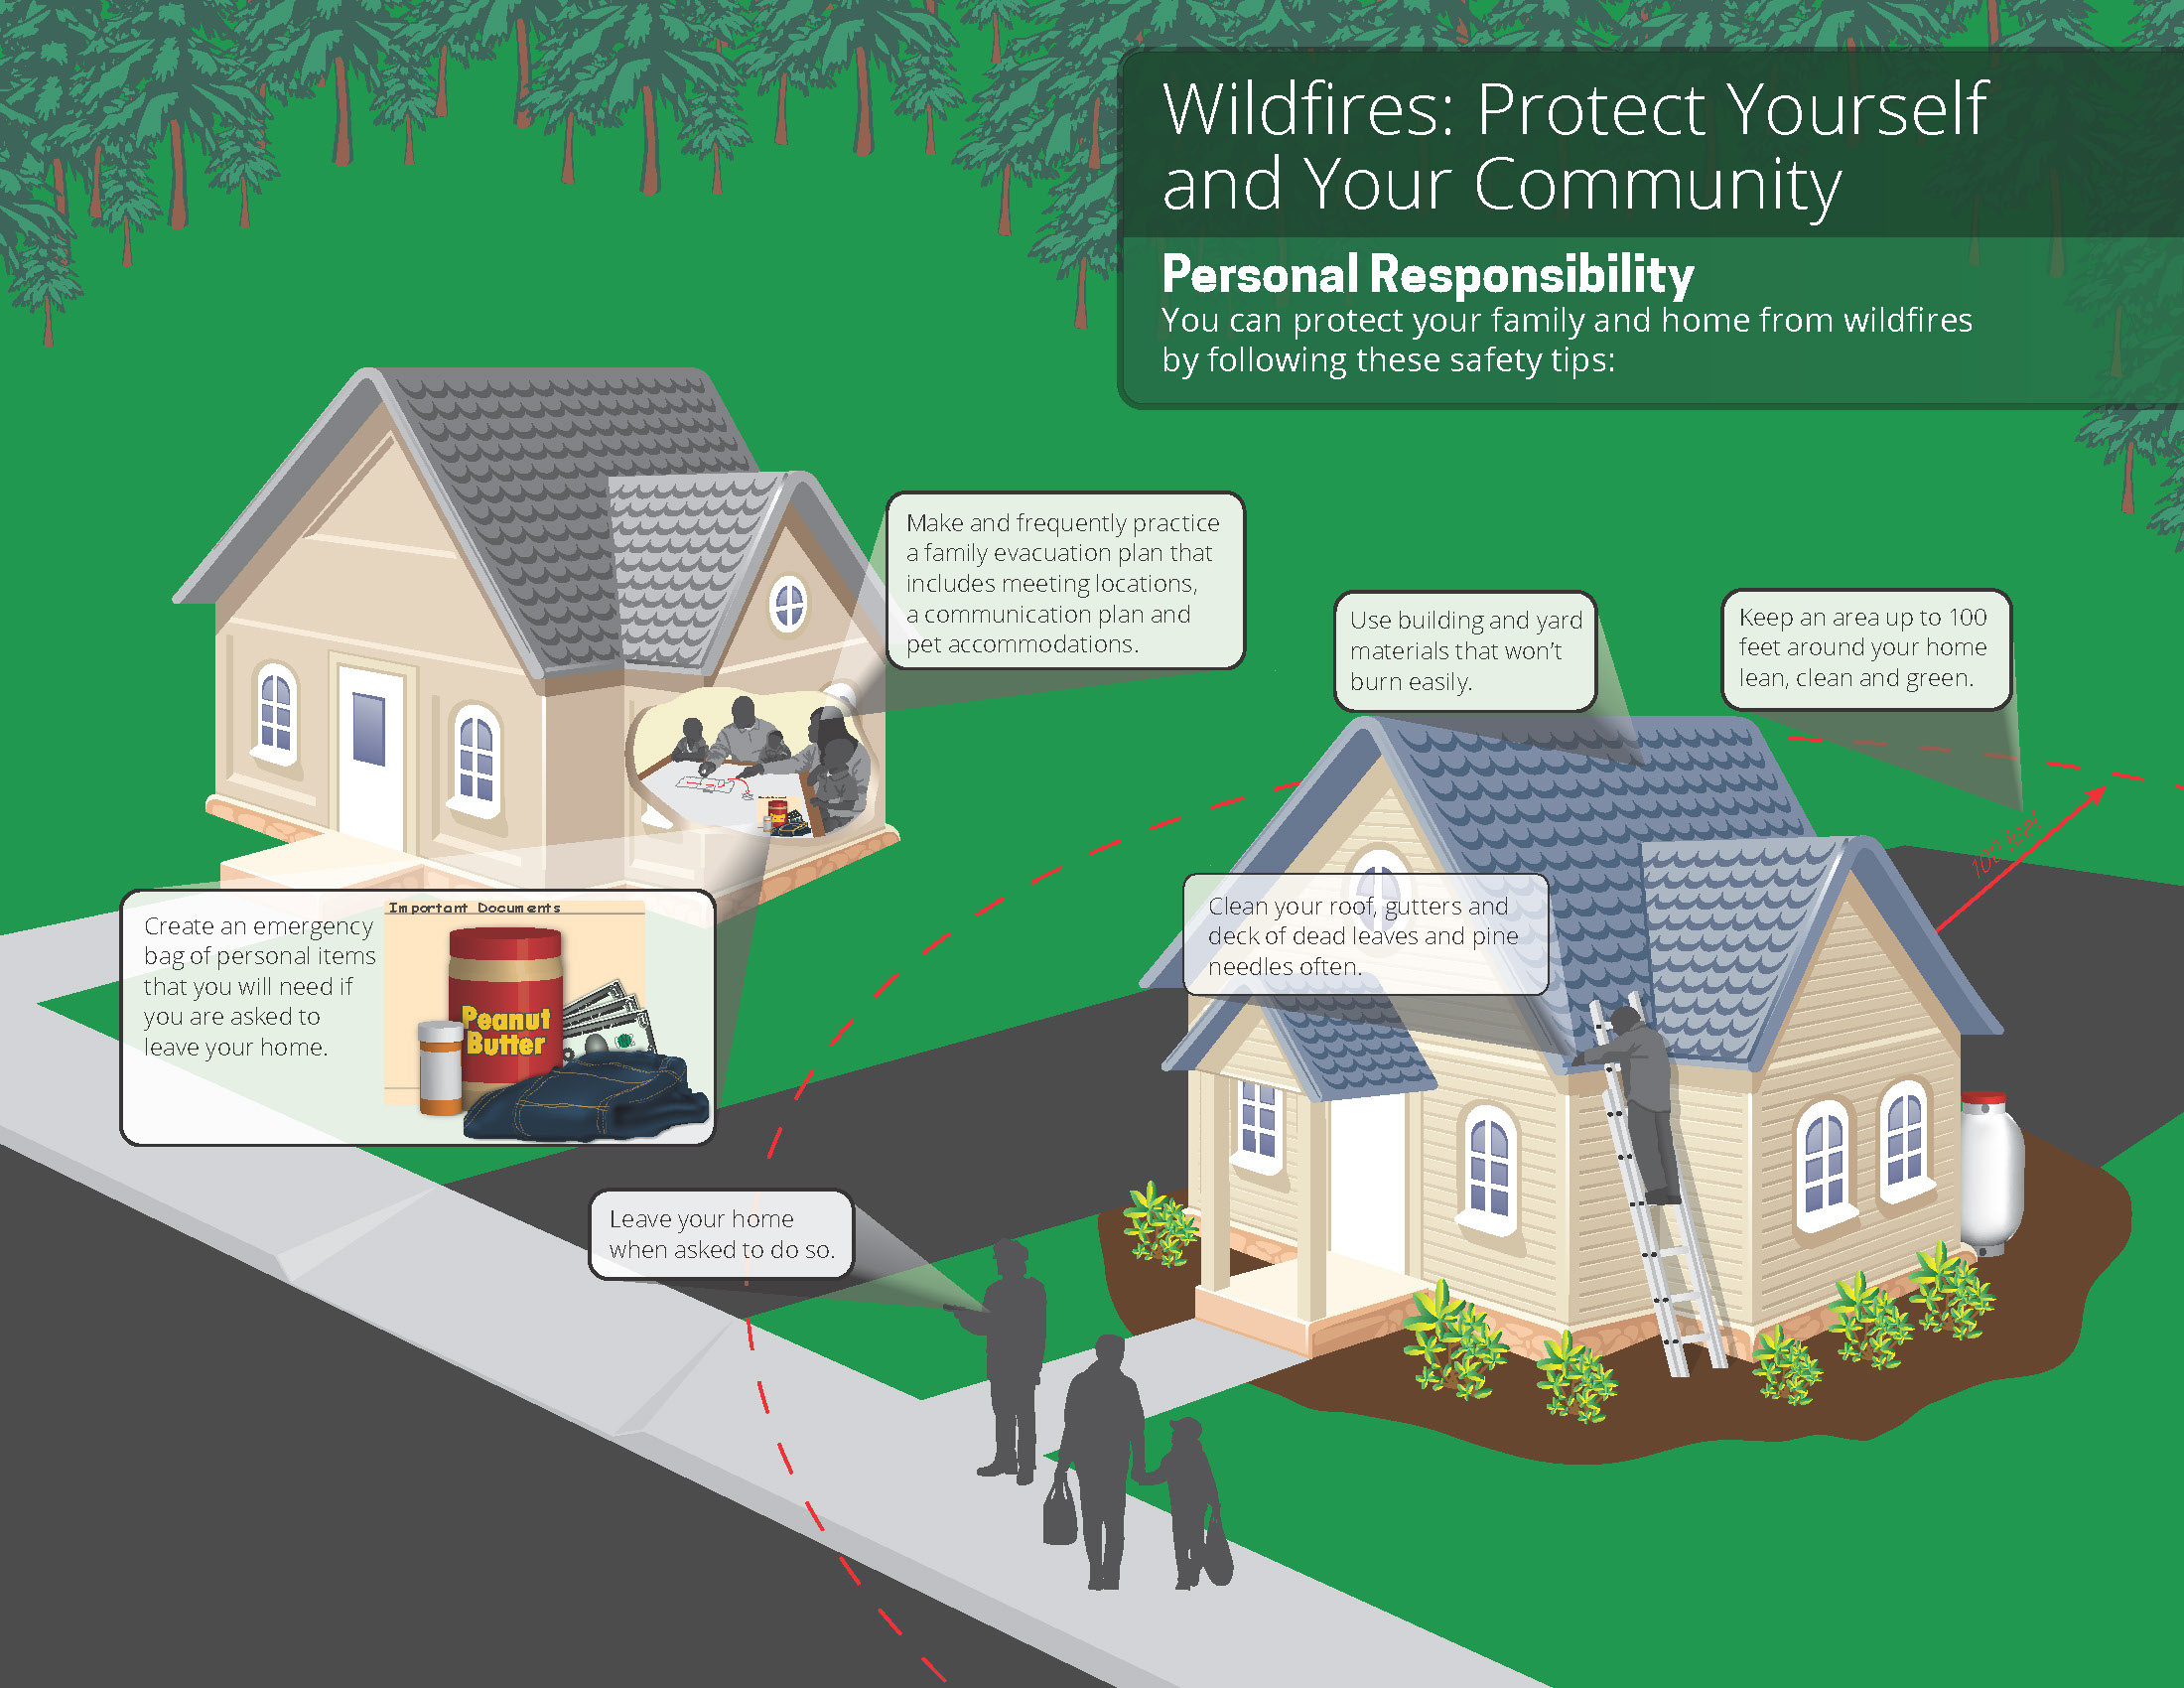 Wildfires: Protect Yourself and Your Community